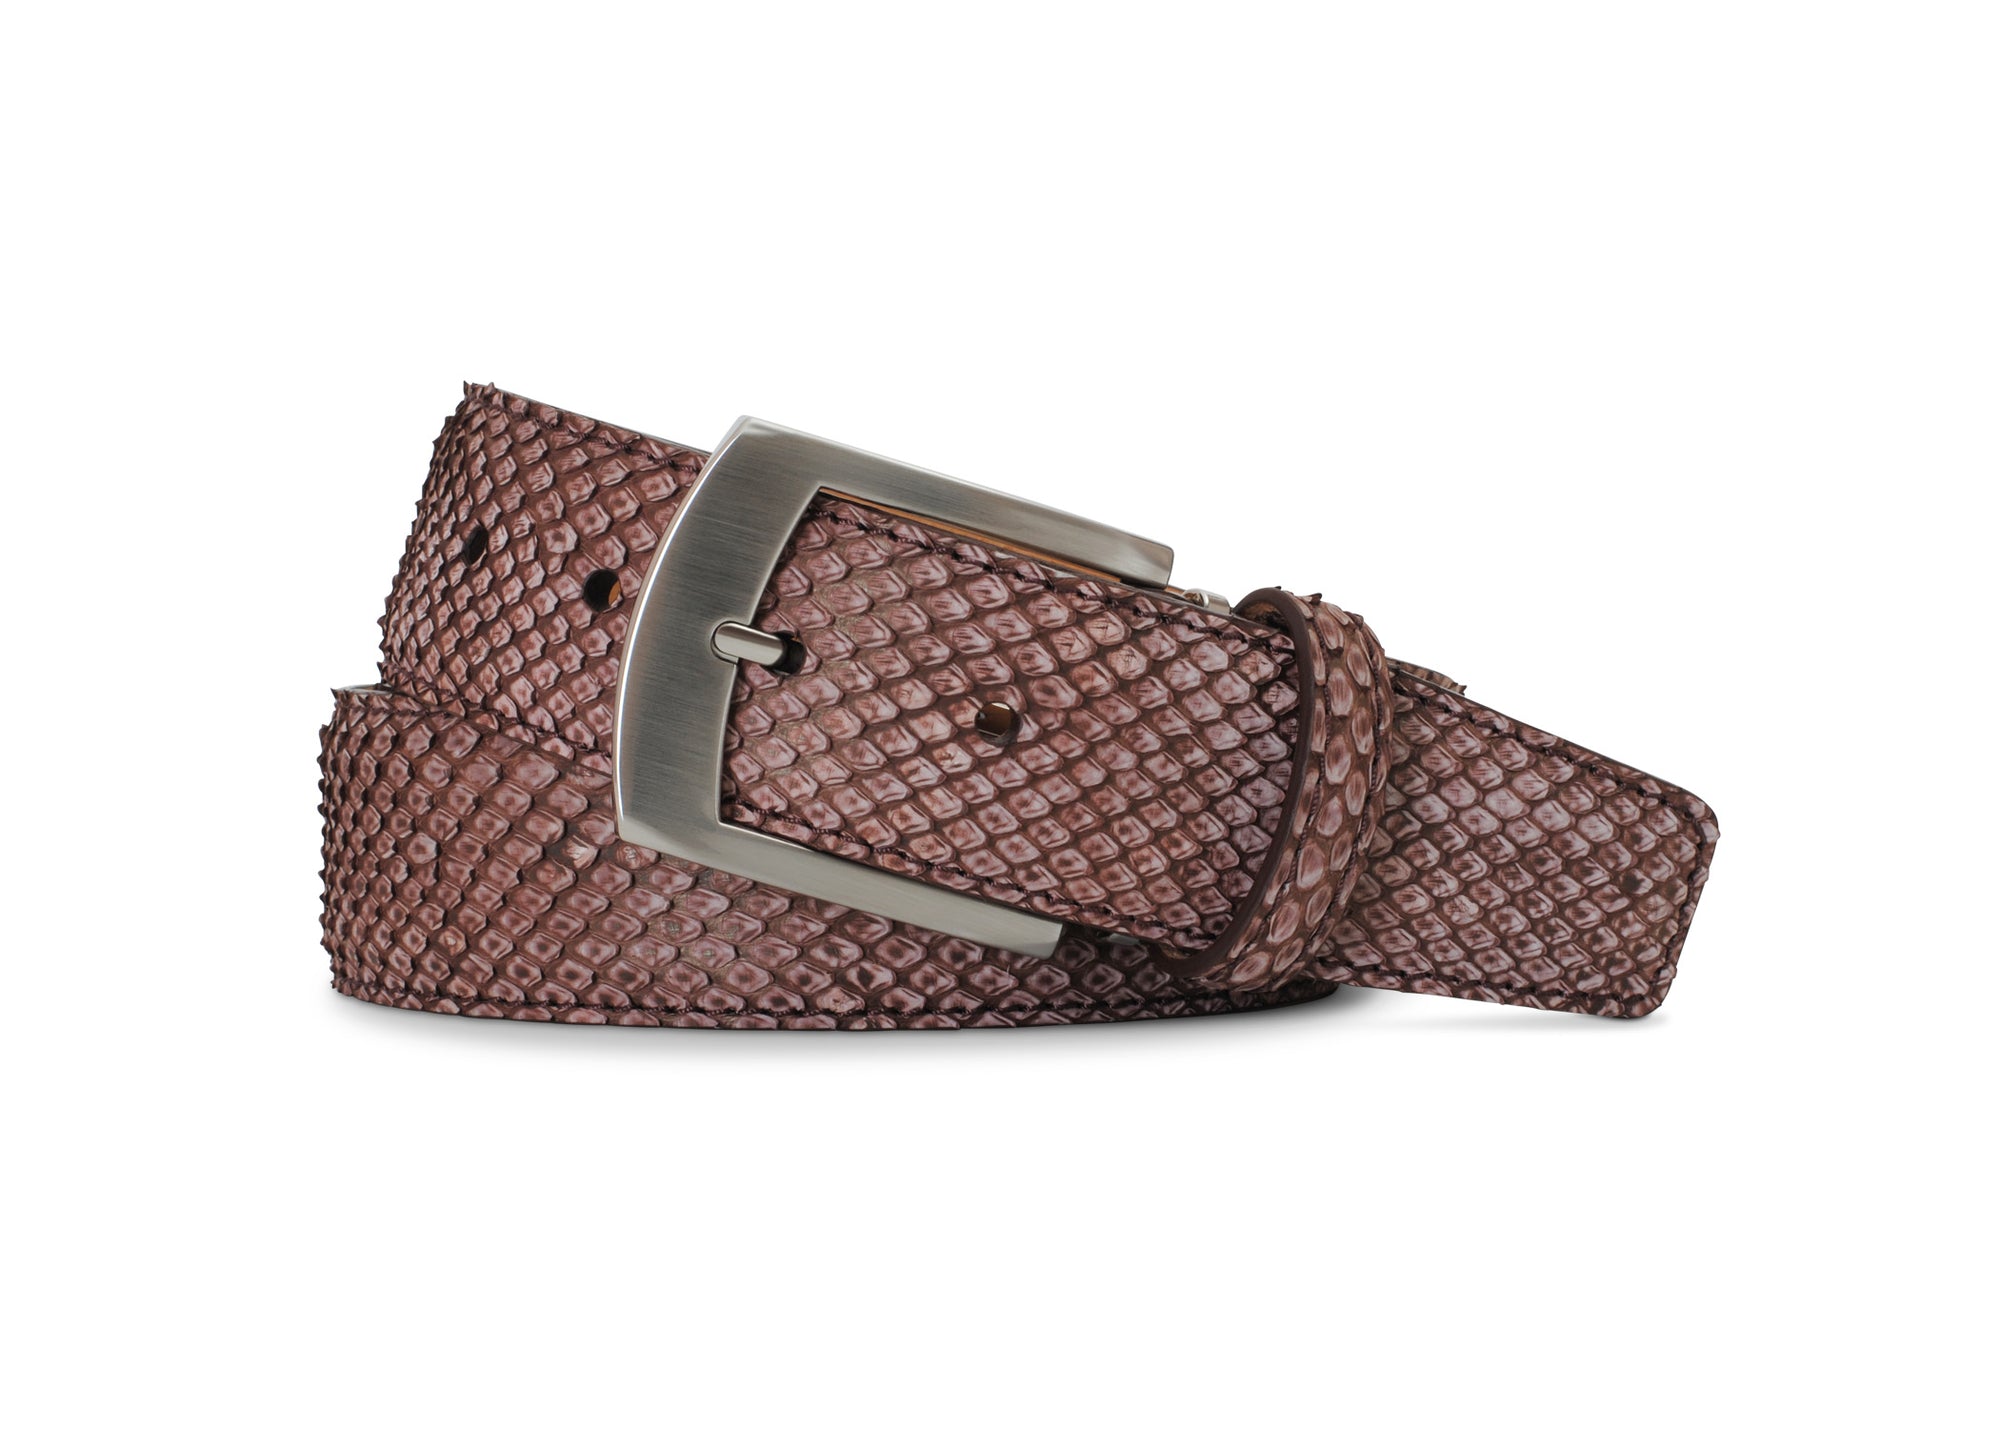 Sueded Belly-Cut Python Belt in Brown by Brookes & Hyde